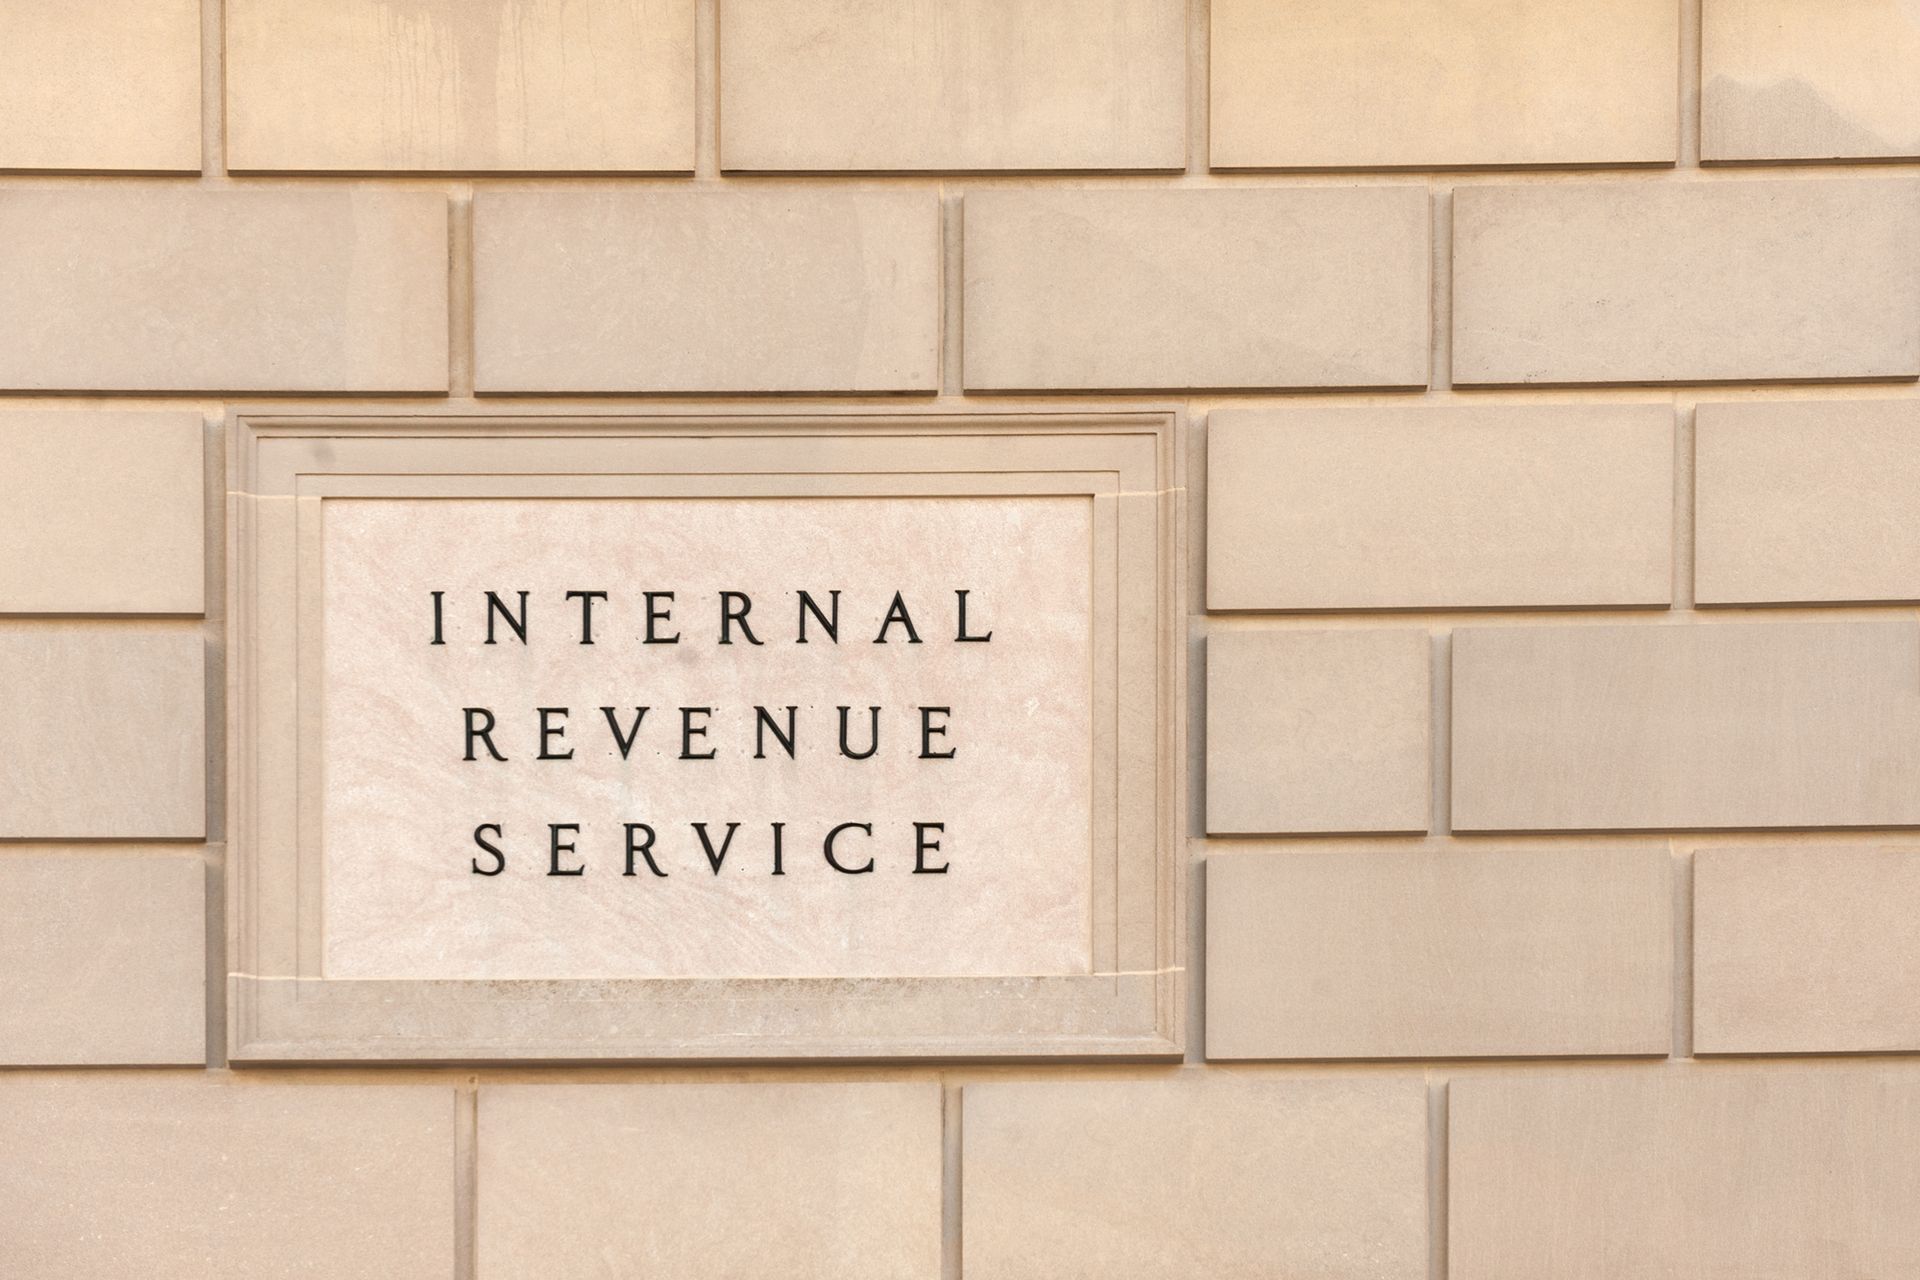 IRS sign on a beige brick IRS building wall.